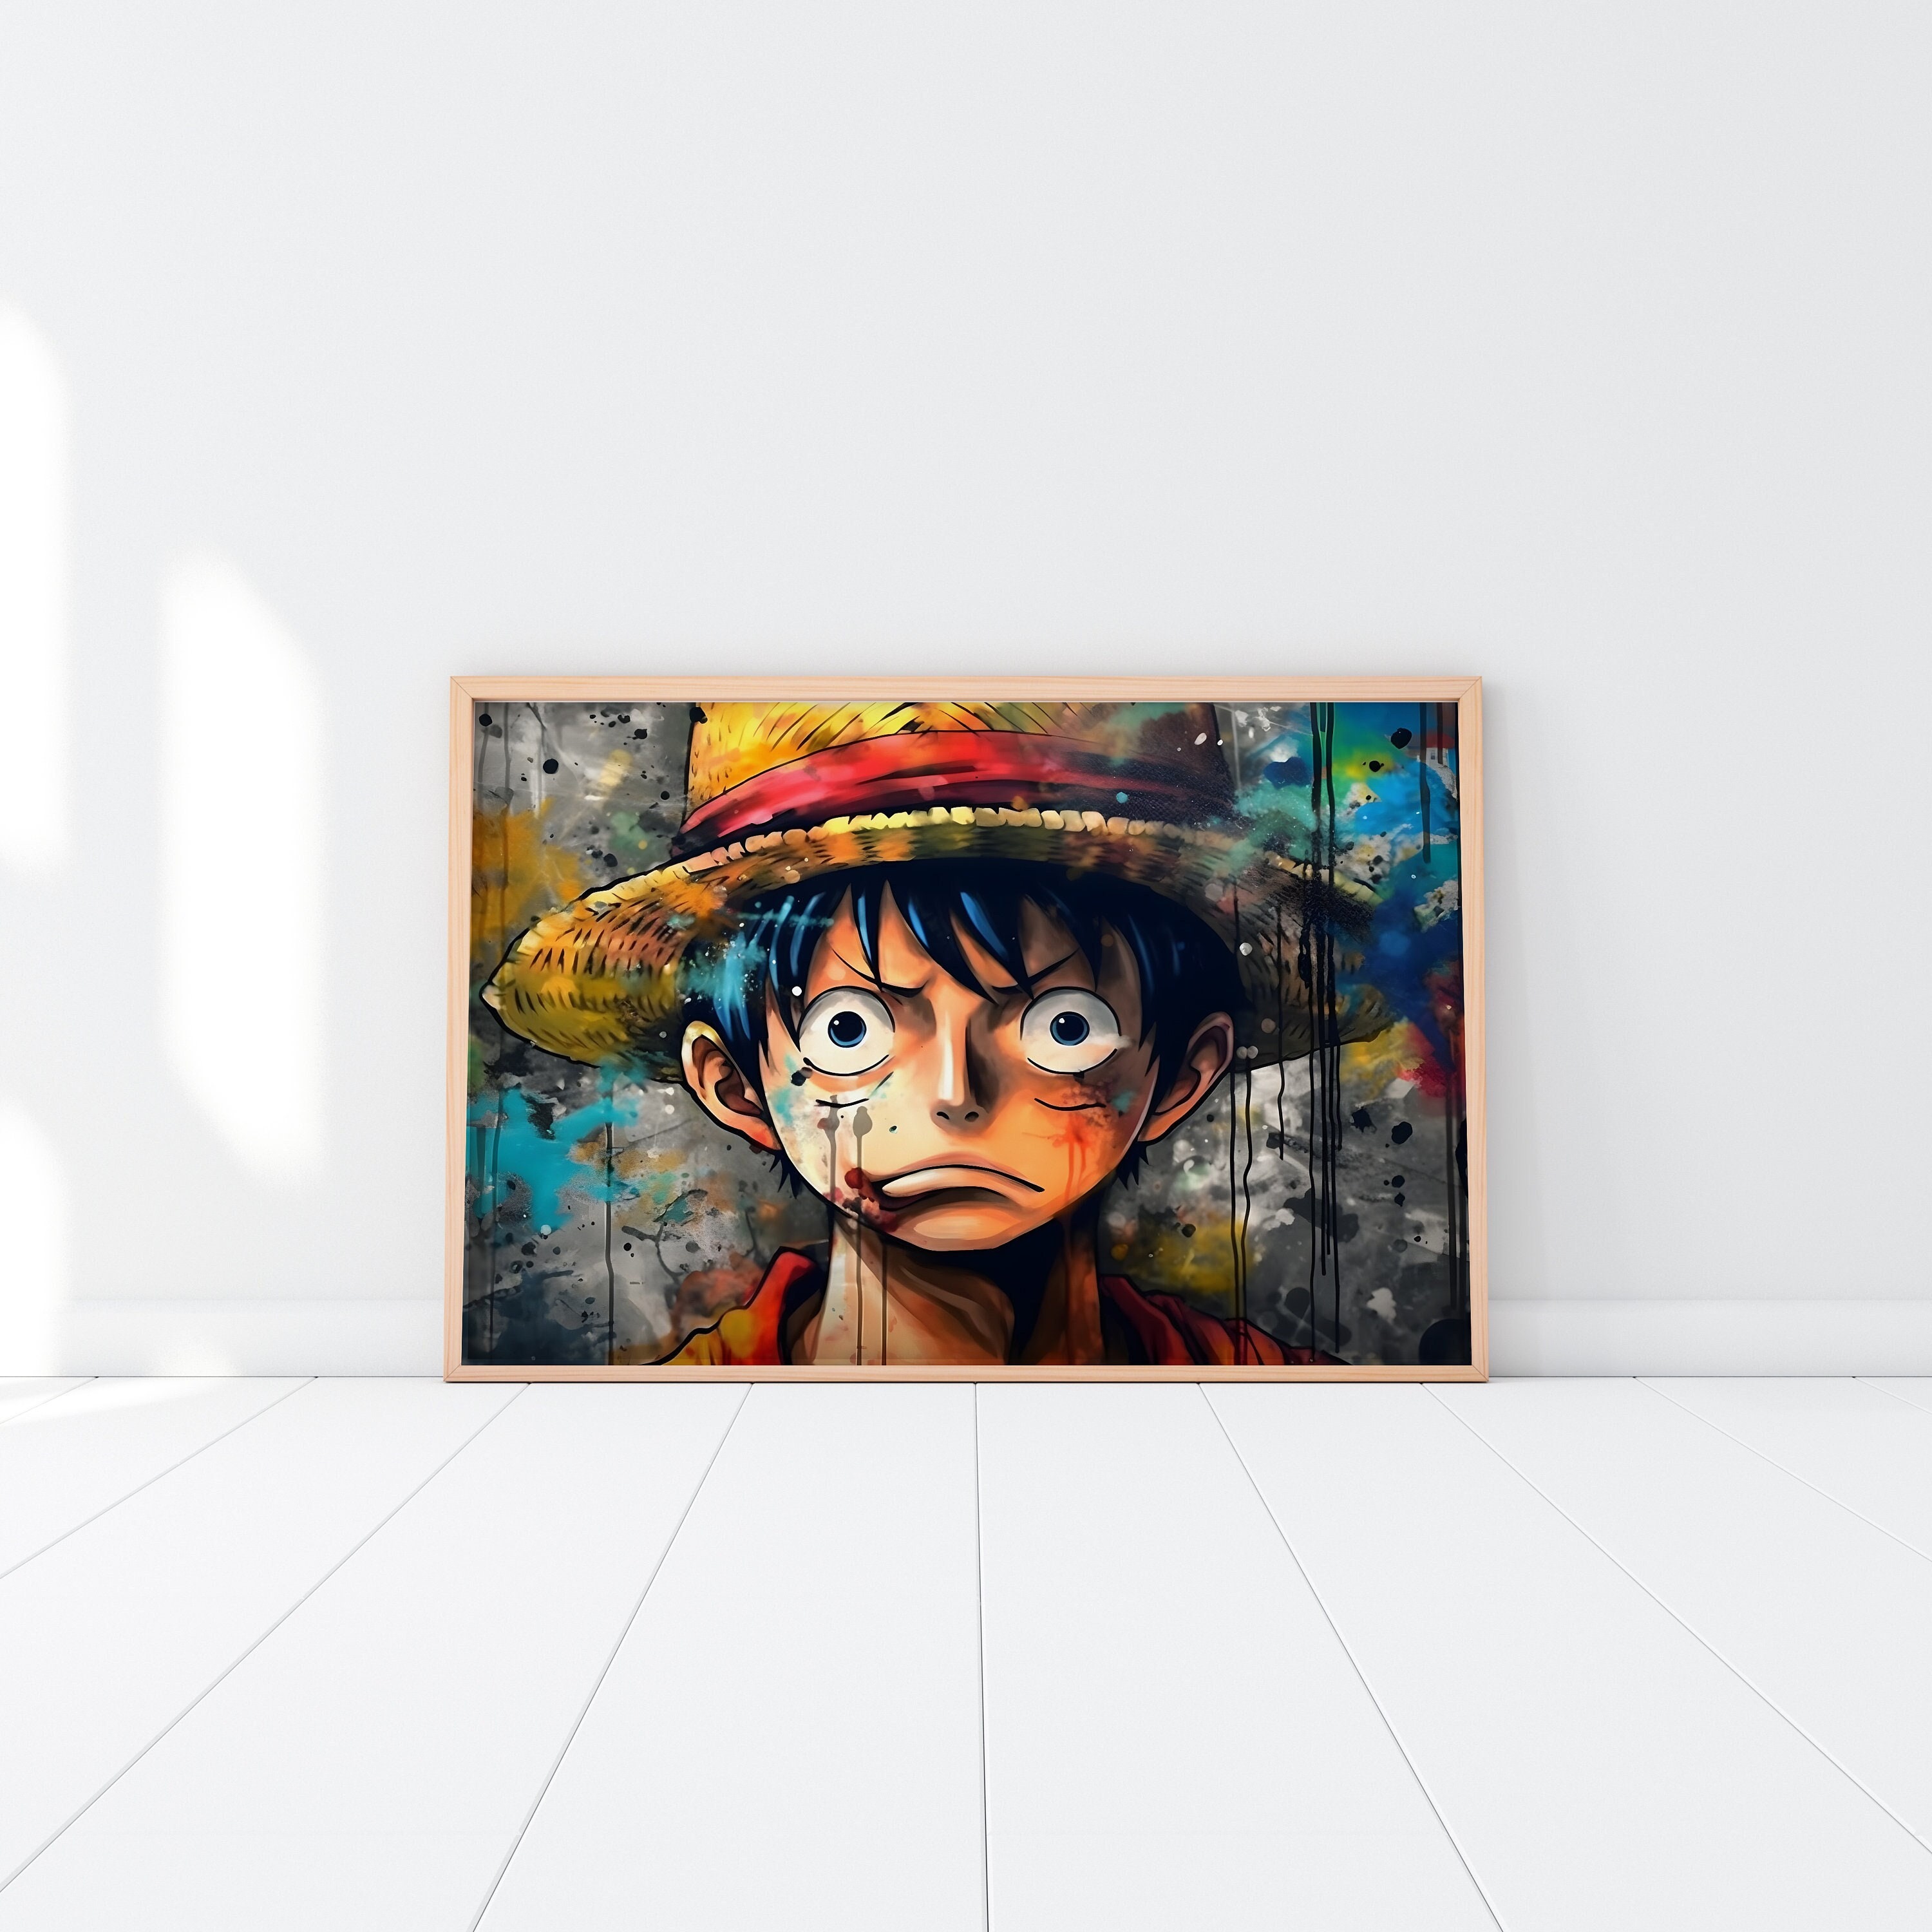 2 Piece Anime One Piece Luffy Zoro New Wanocountry Kaido HD Poster Cartoon  Manga Canvas Painting Wall Pictures for Living Room Wall Decoration Boy  Gift--Unframed